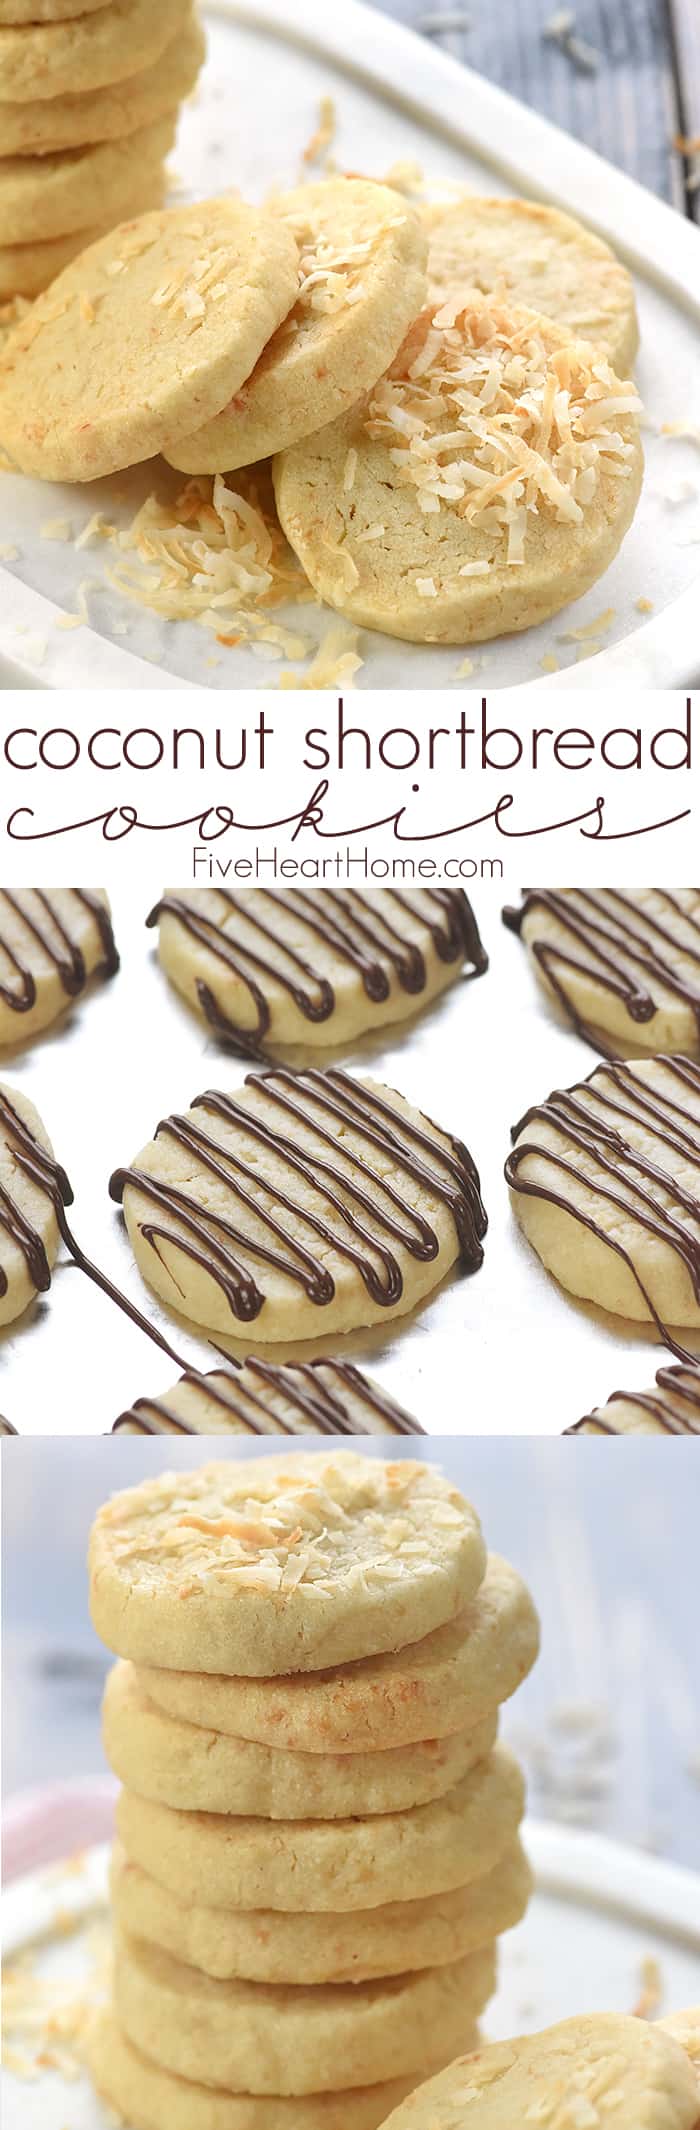 Easy Coconut Shortbread Cookies ~ tender, buttery shortbread is loaded with toasted coconut in this delicious, addictive, easy-to-make recipe! | FiveHeartHome.com via @fivehearthome